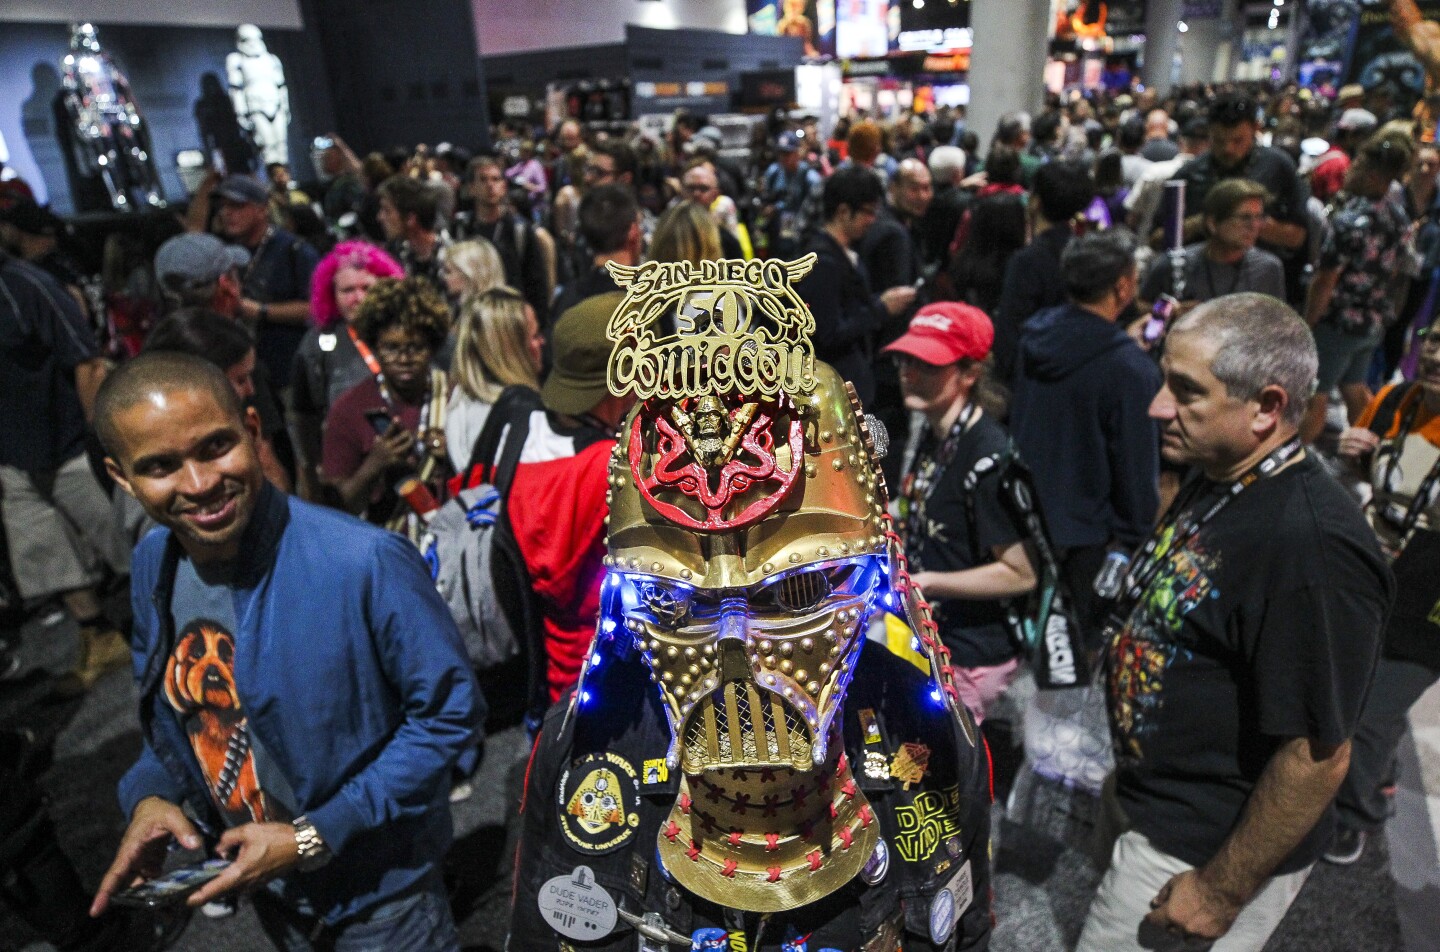 Christopher Canole, from La Jolla, wears his Dudevader headgear, which commemorates 50 years of Comic-Con in San Diego during Comic-Con International's Preview Night at the San Diego Convention Center on Wednesday, July 17, 2019 in San Diego, California.